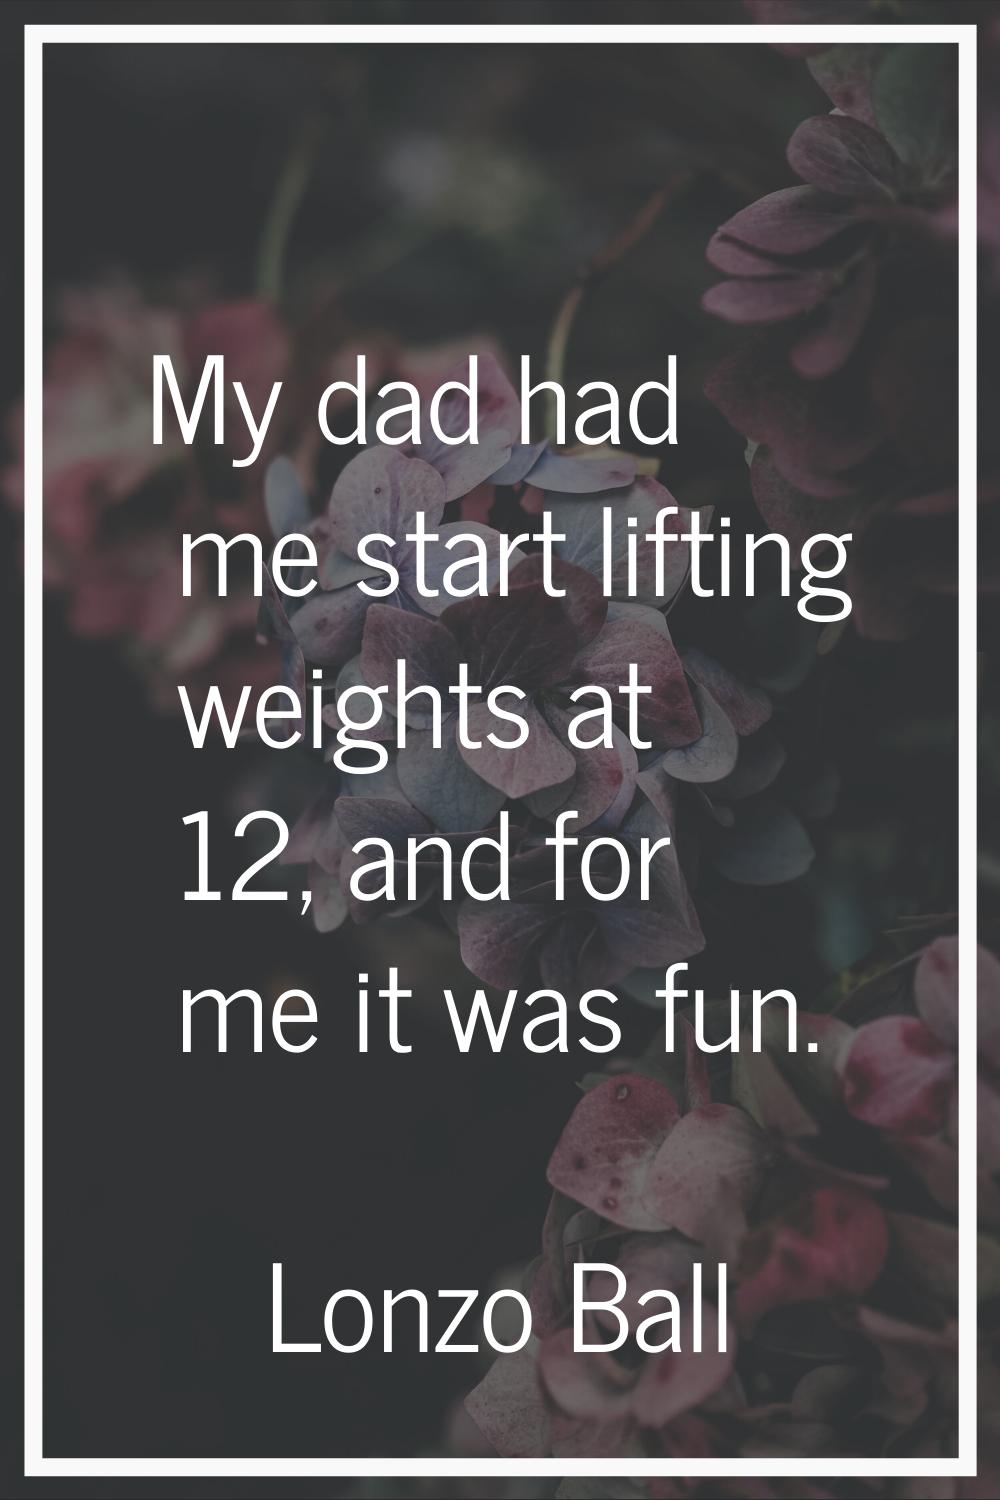 My dad had me start lifting weights at 12, and for me it was fun.